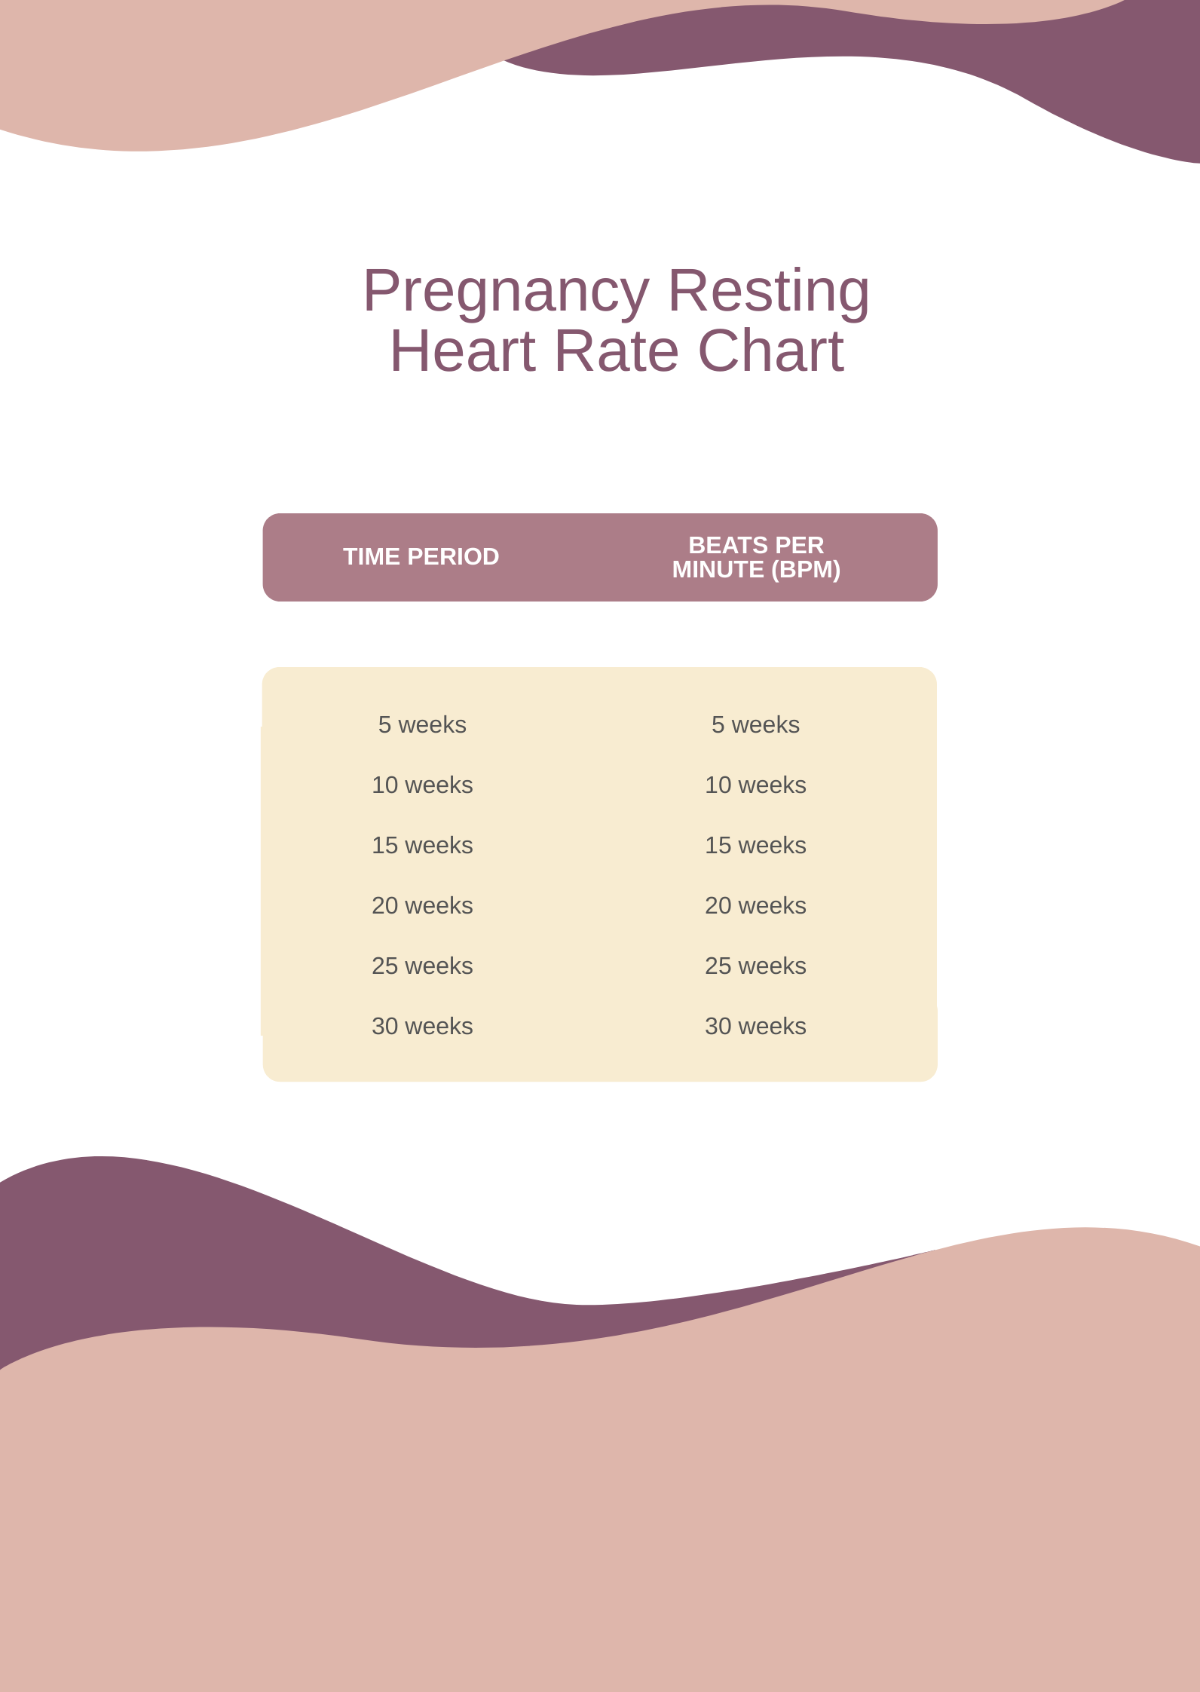 Pregnancy Resting Heart Rate Chart Template